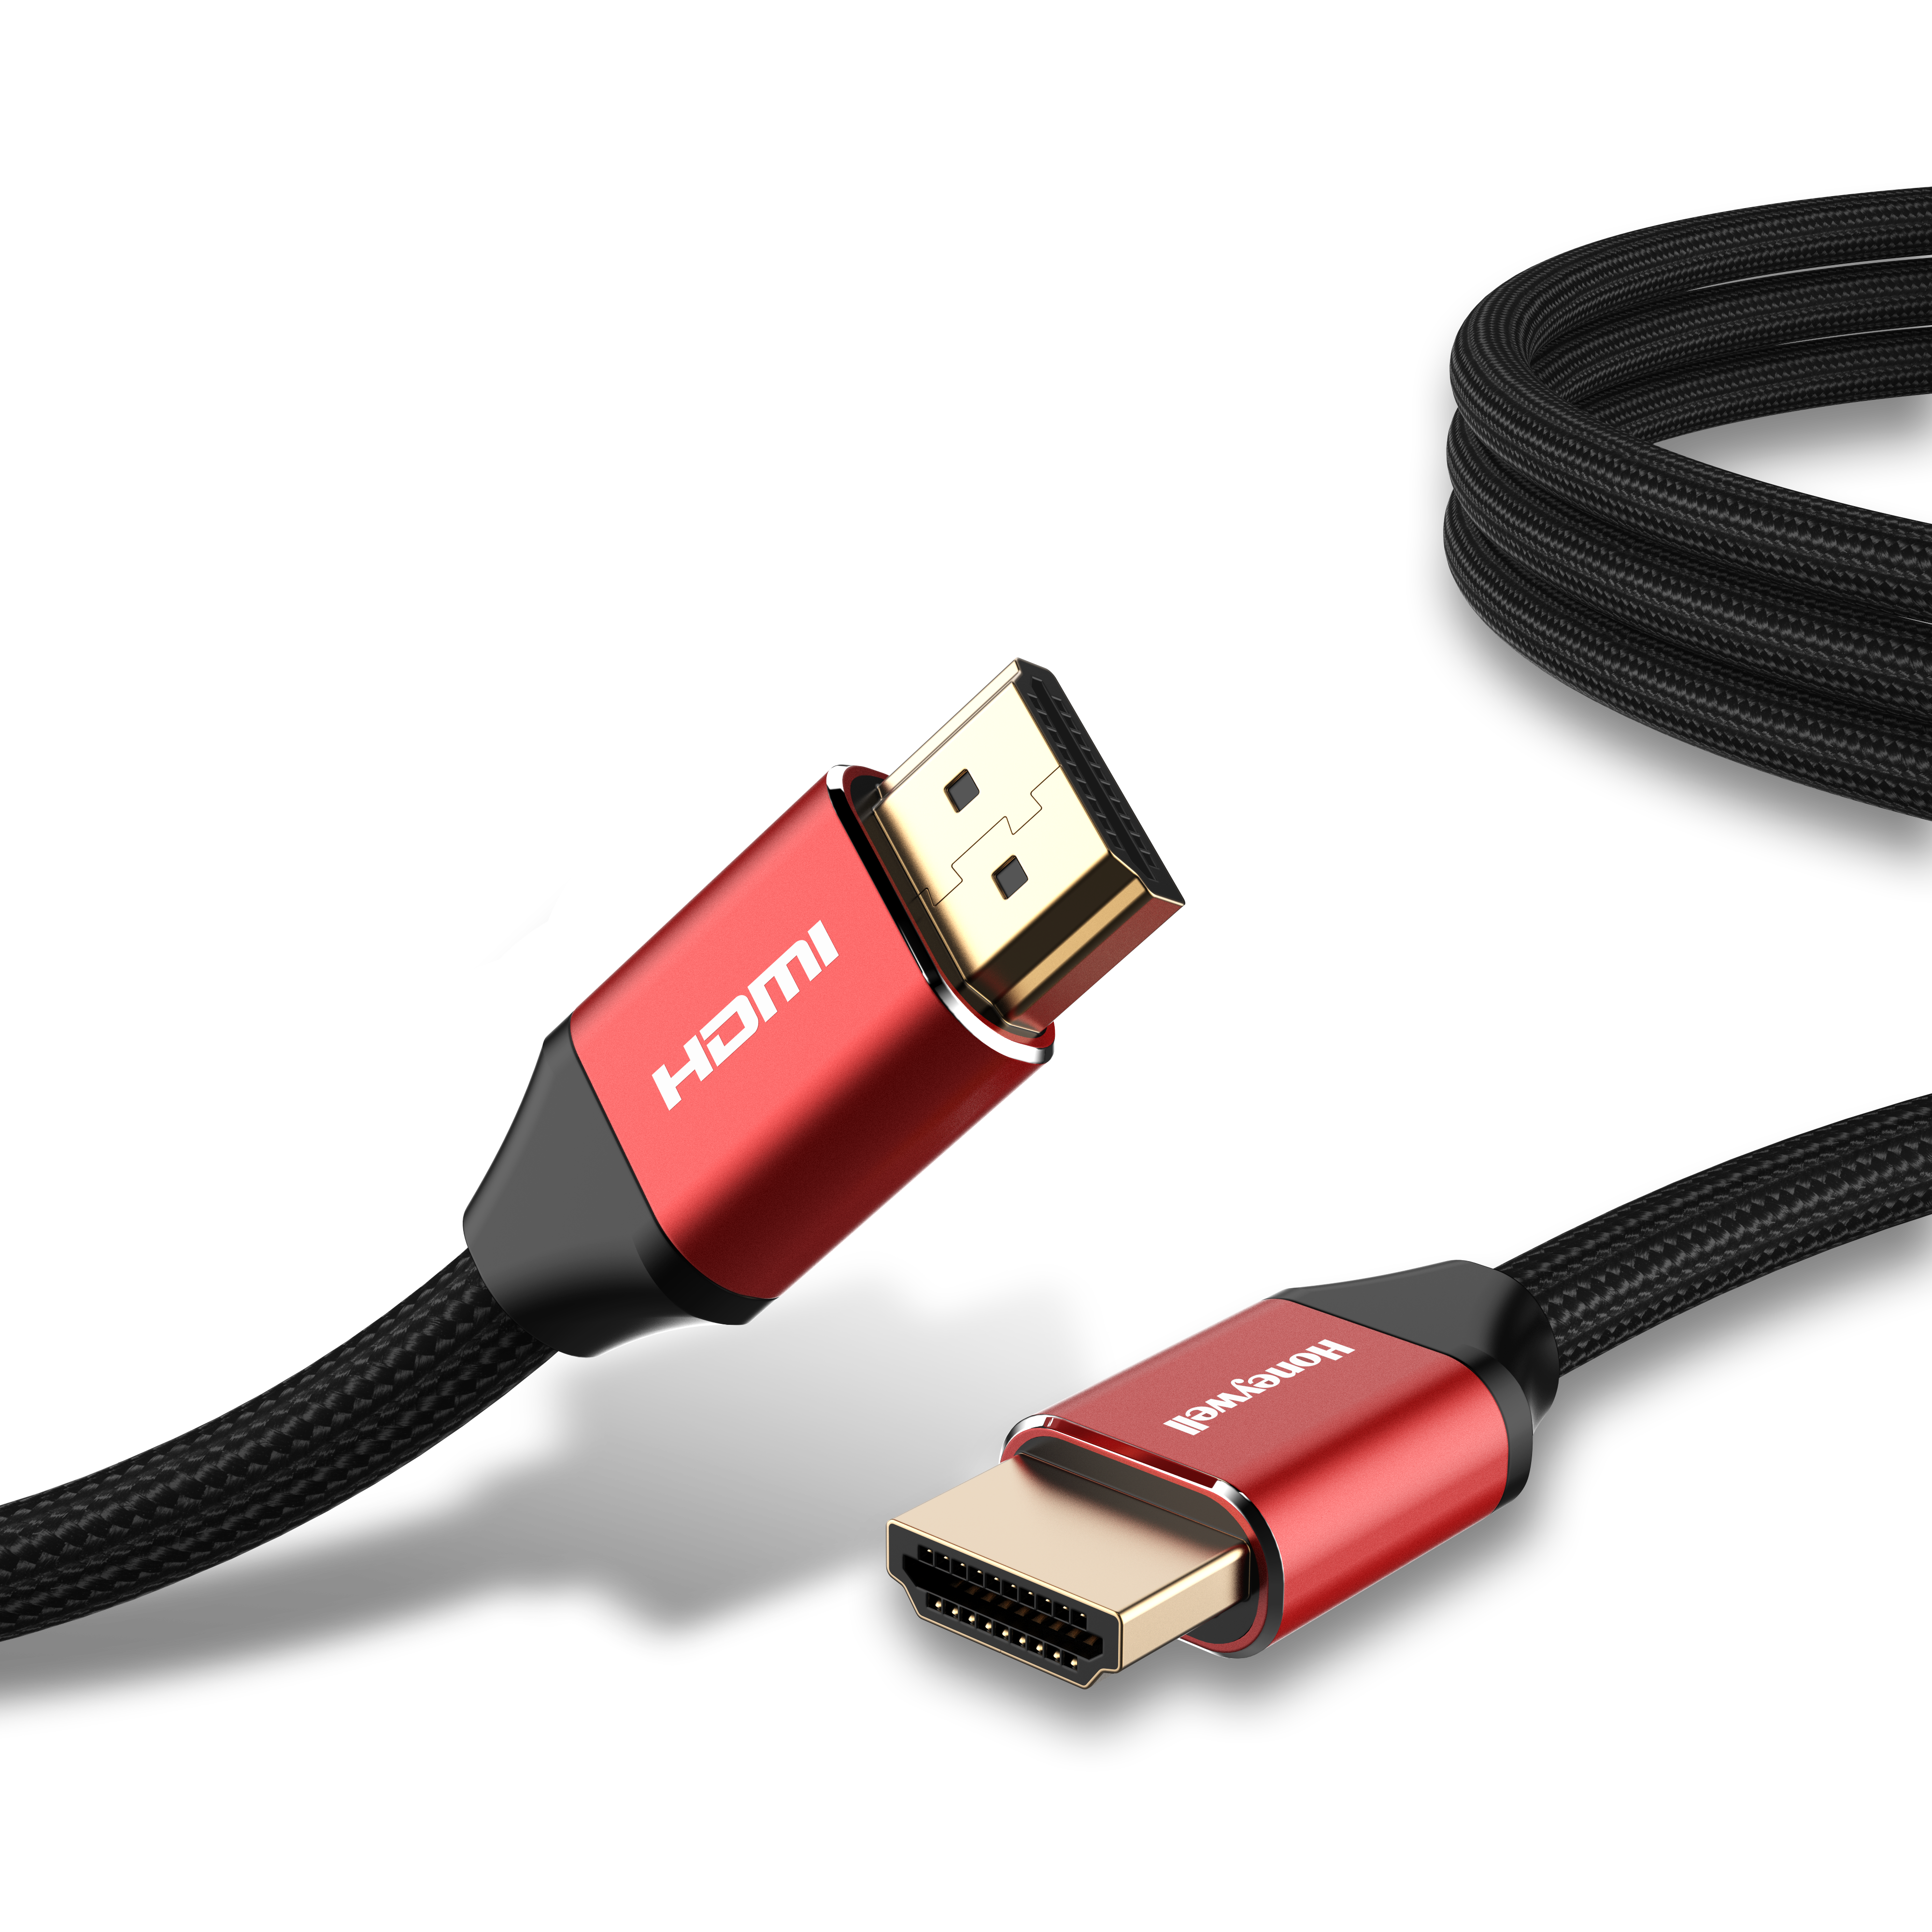 Honeywell HDMI Cable 2.1 with Ethernet- 1 Meter